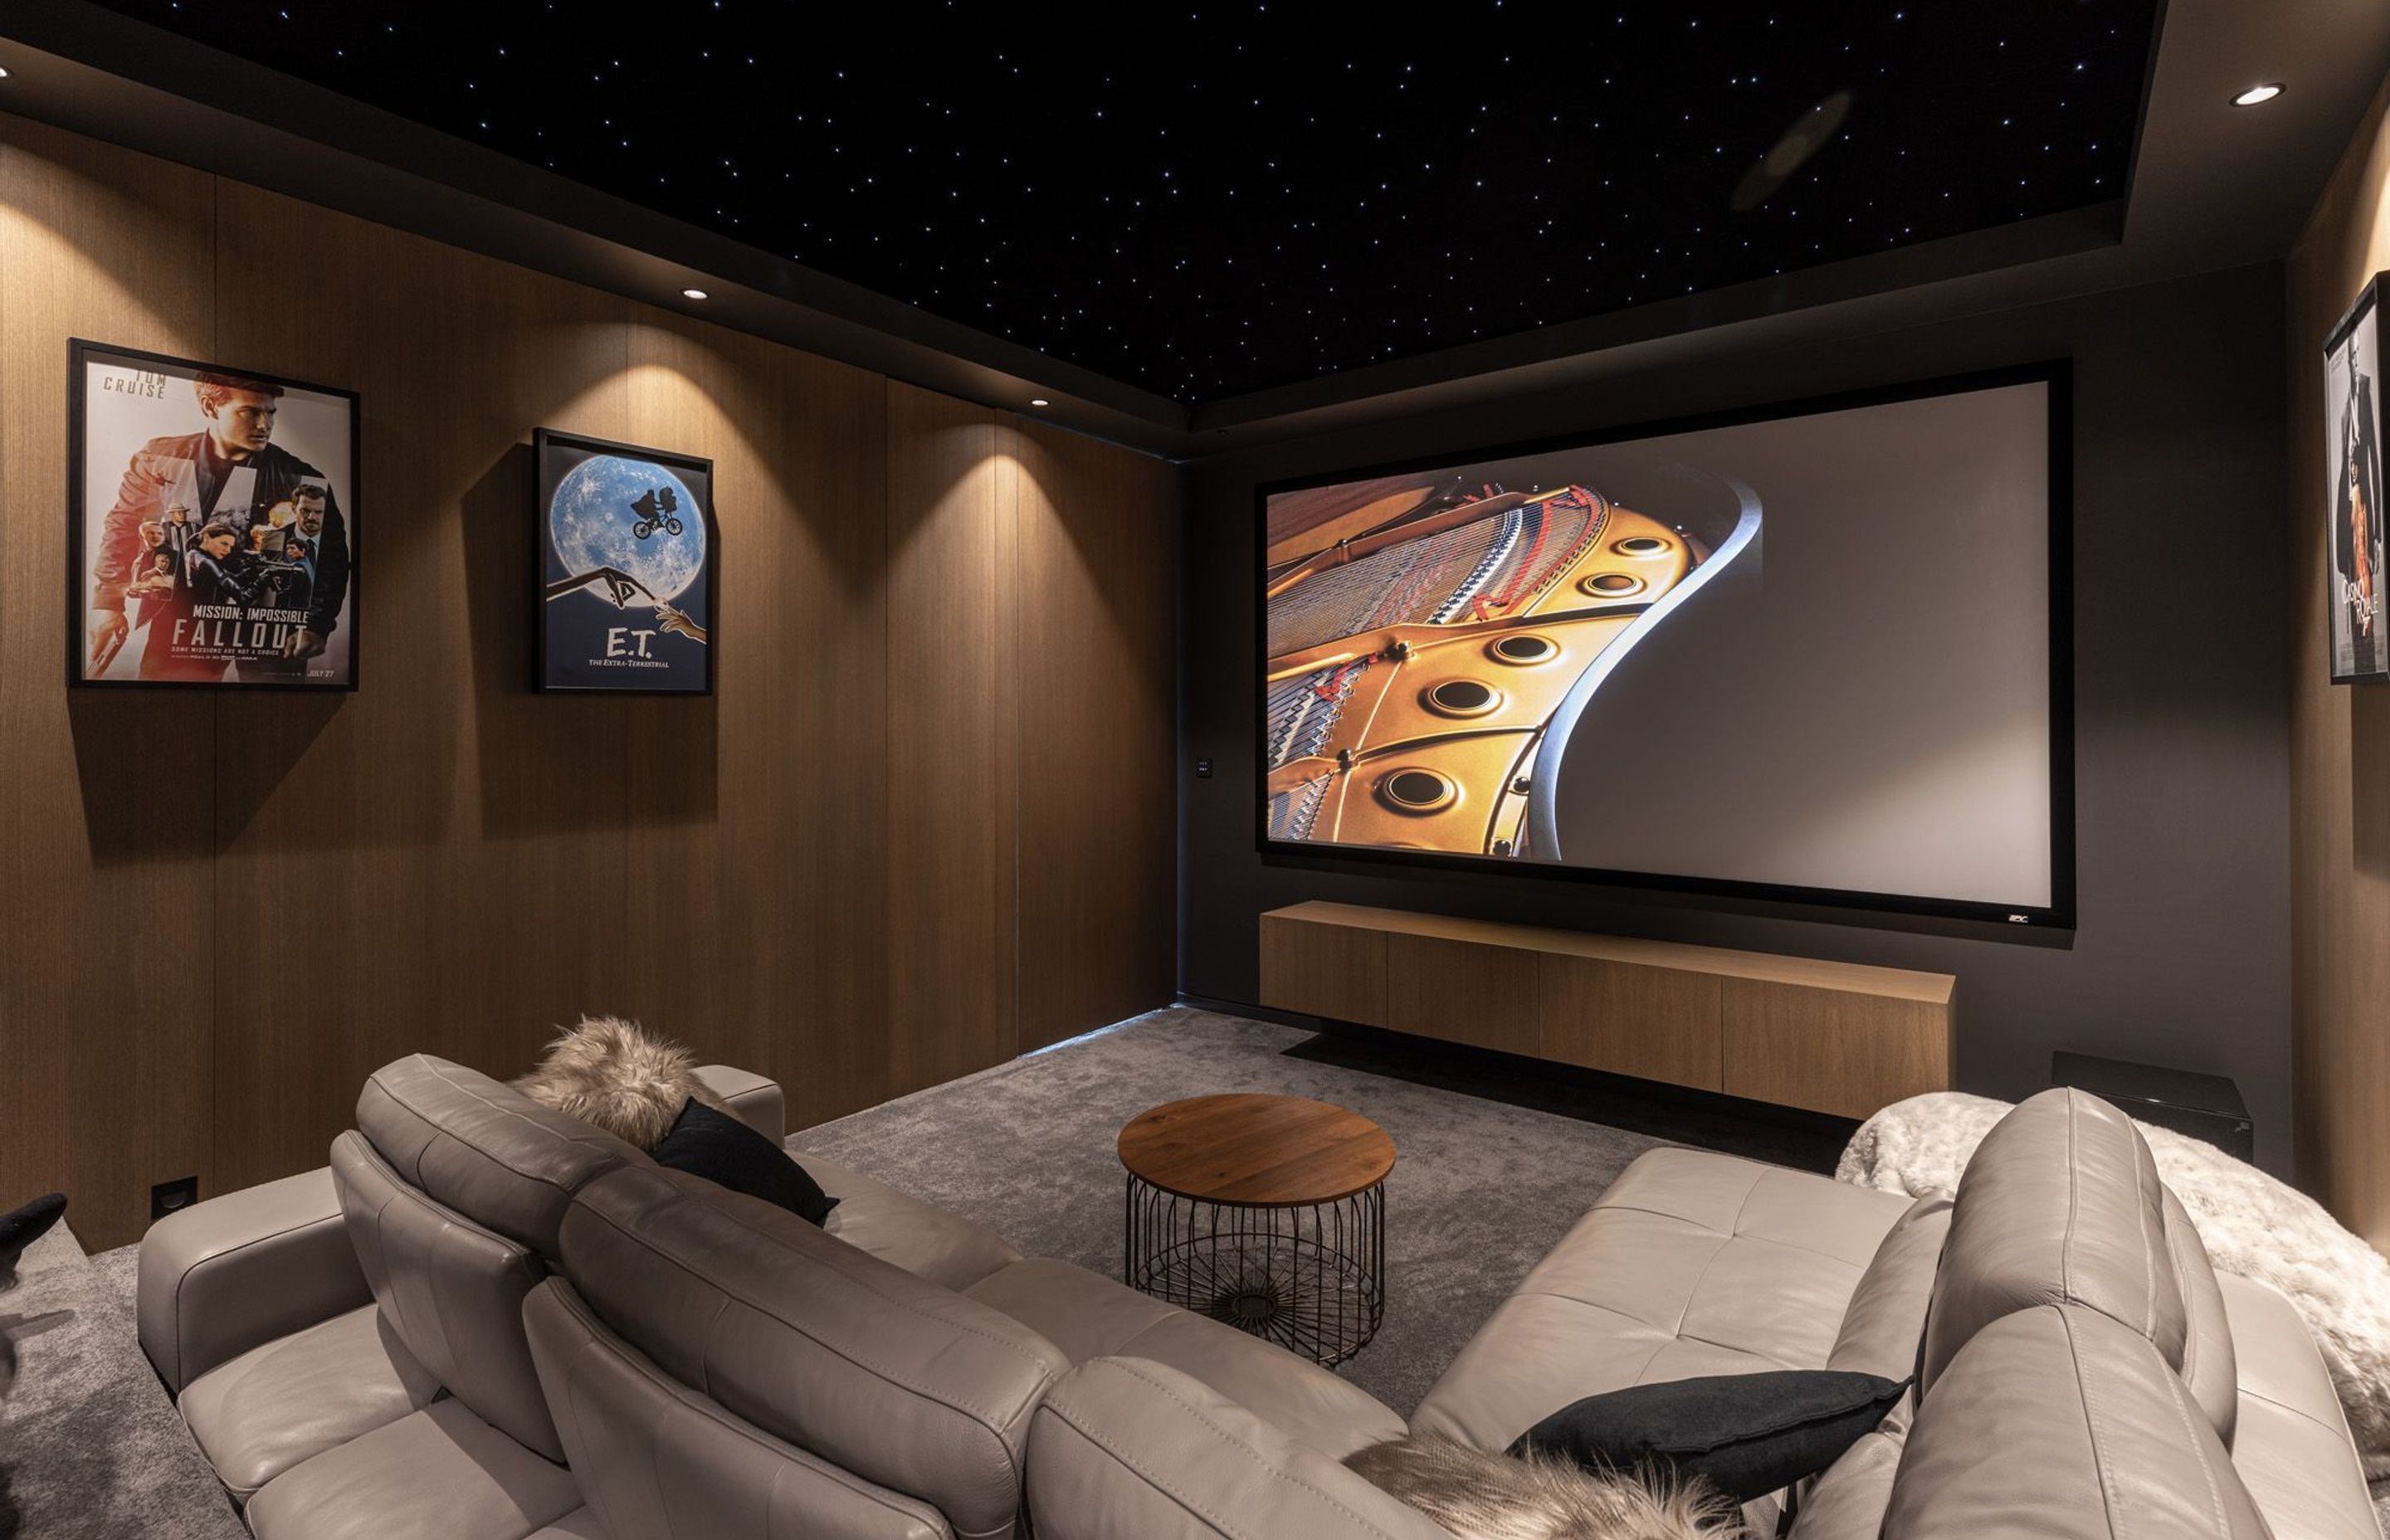 The site is very narrow so space at the back of the living area was perfectly suited to being a darker soundproofed environment for the home cinema, featuring a gorgeous starry ceiling.